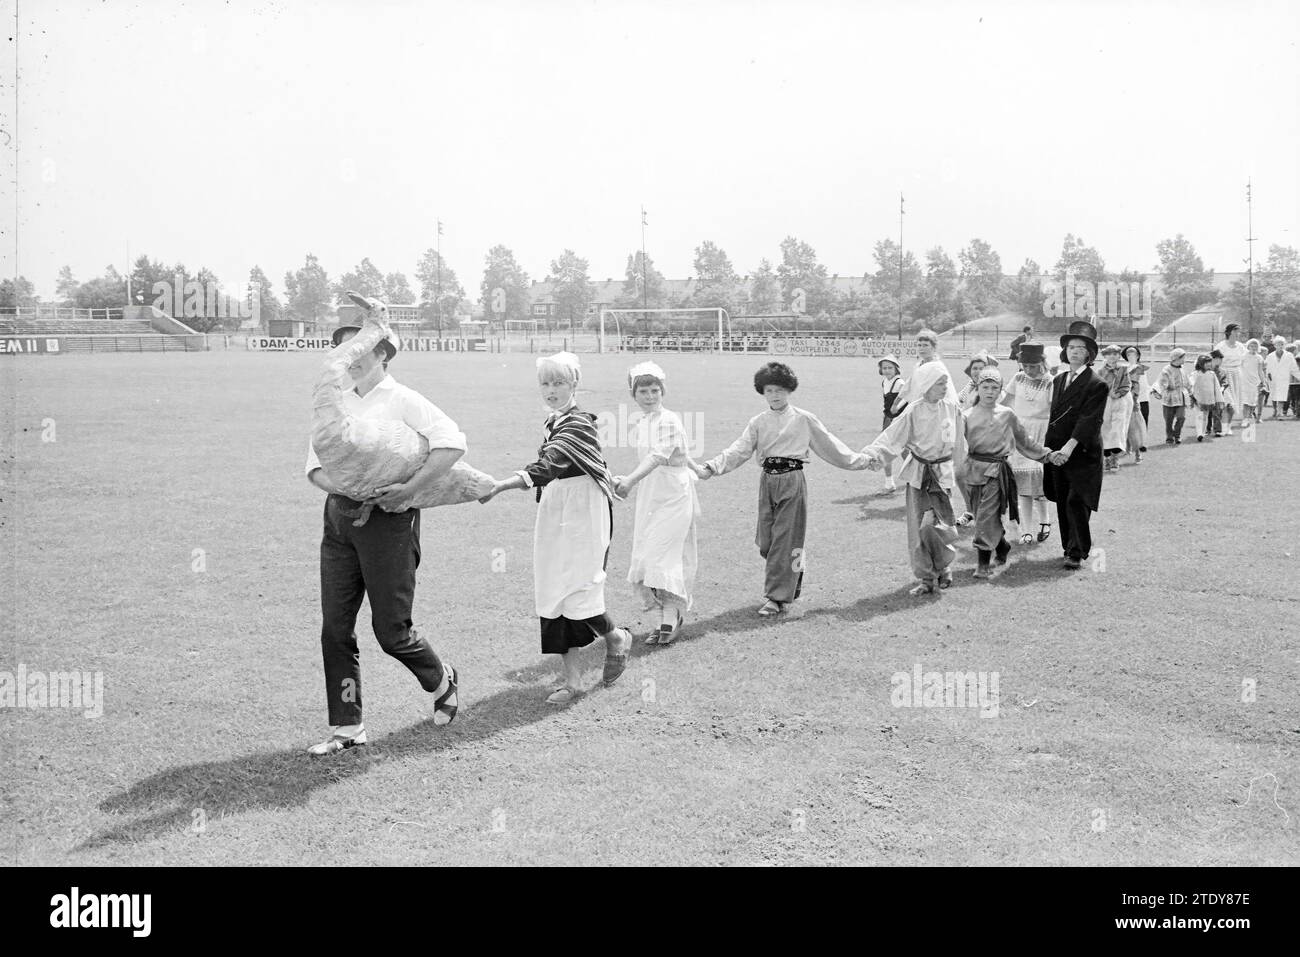 Folk dancing E.D.O. terrain, Folk dancing, 18-07-1968, Whizgle News from the Past, Tailored for the Future. Explore historical narratives, Dutch The Netherlands agency image with a modern perspective, bridging the gap between yesterday's events and tomorrow's insights. A timeless journey shaping the stories that shape our future. Stock Photo